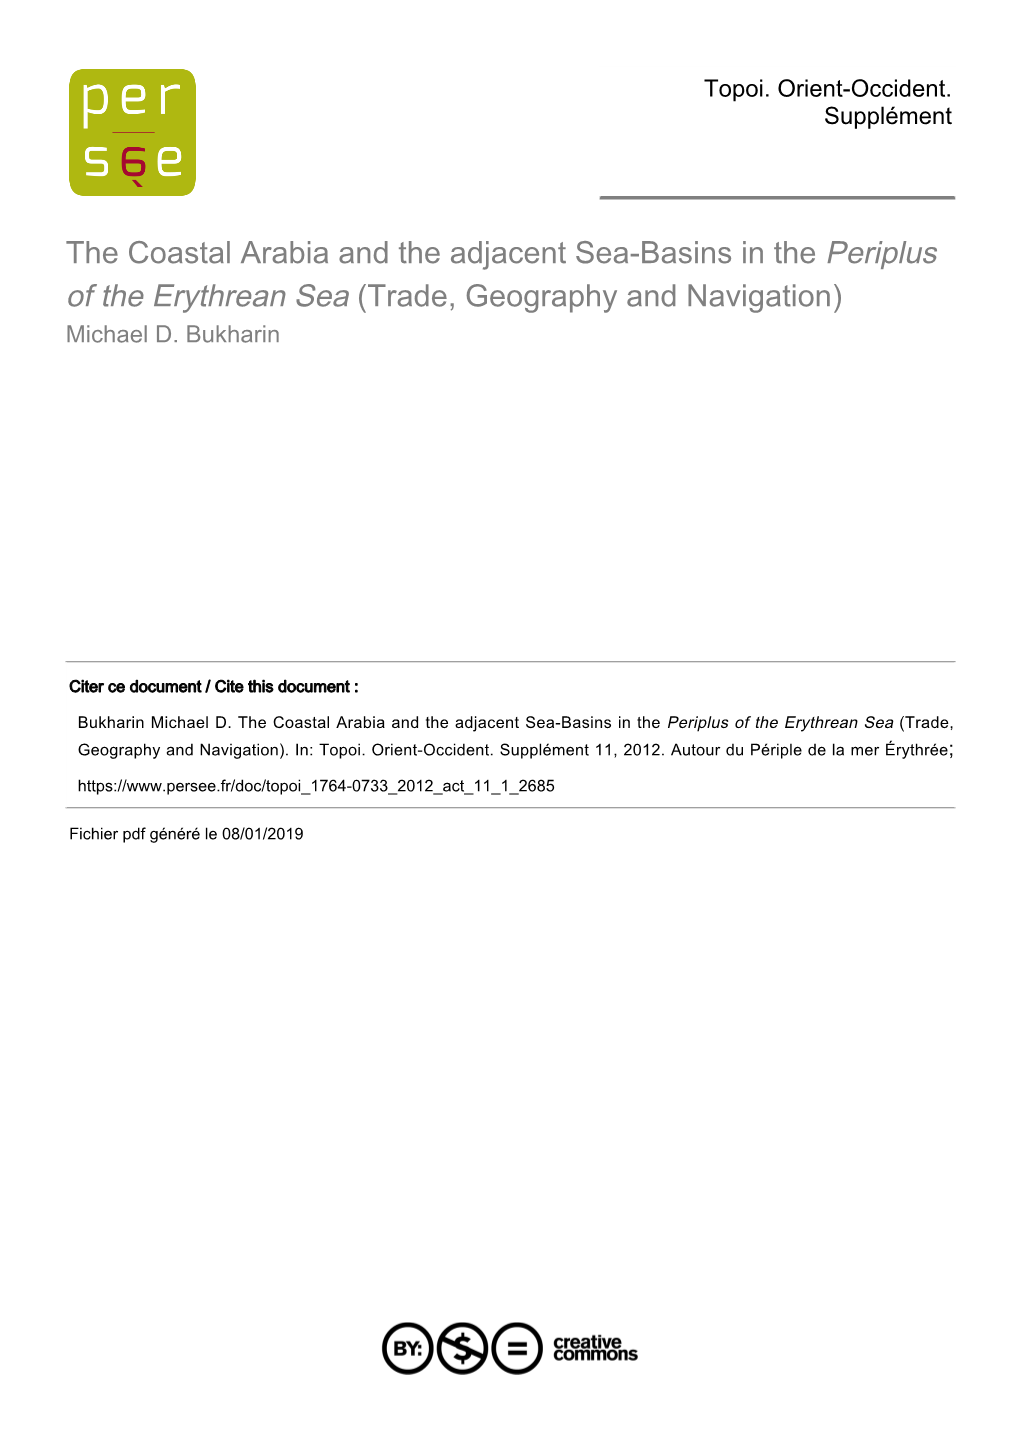 The Coastal Arabia and the Adjacent Sea-Basins in the Periplus of the Erythrean Sea (Trade, Geography and Navigation) Michael D